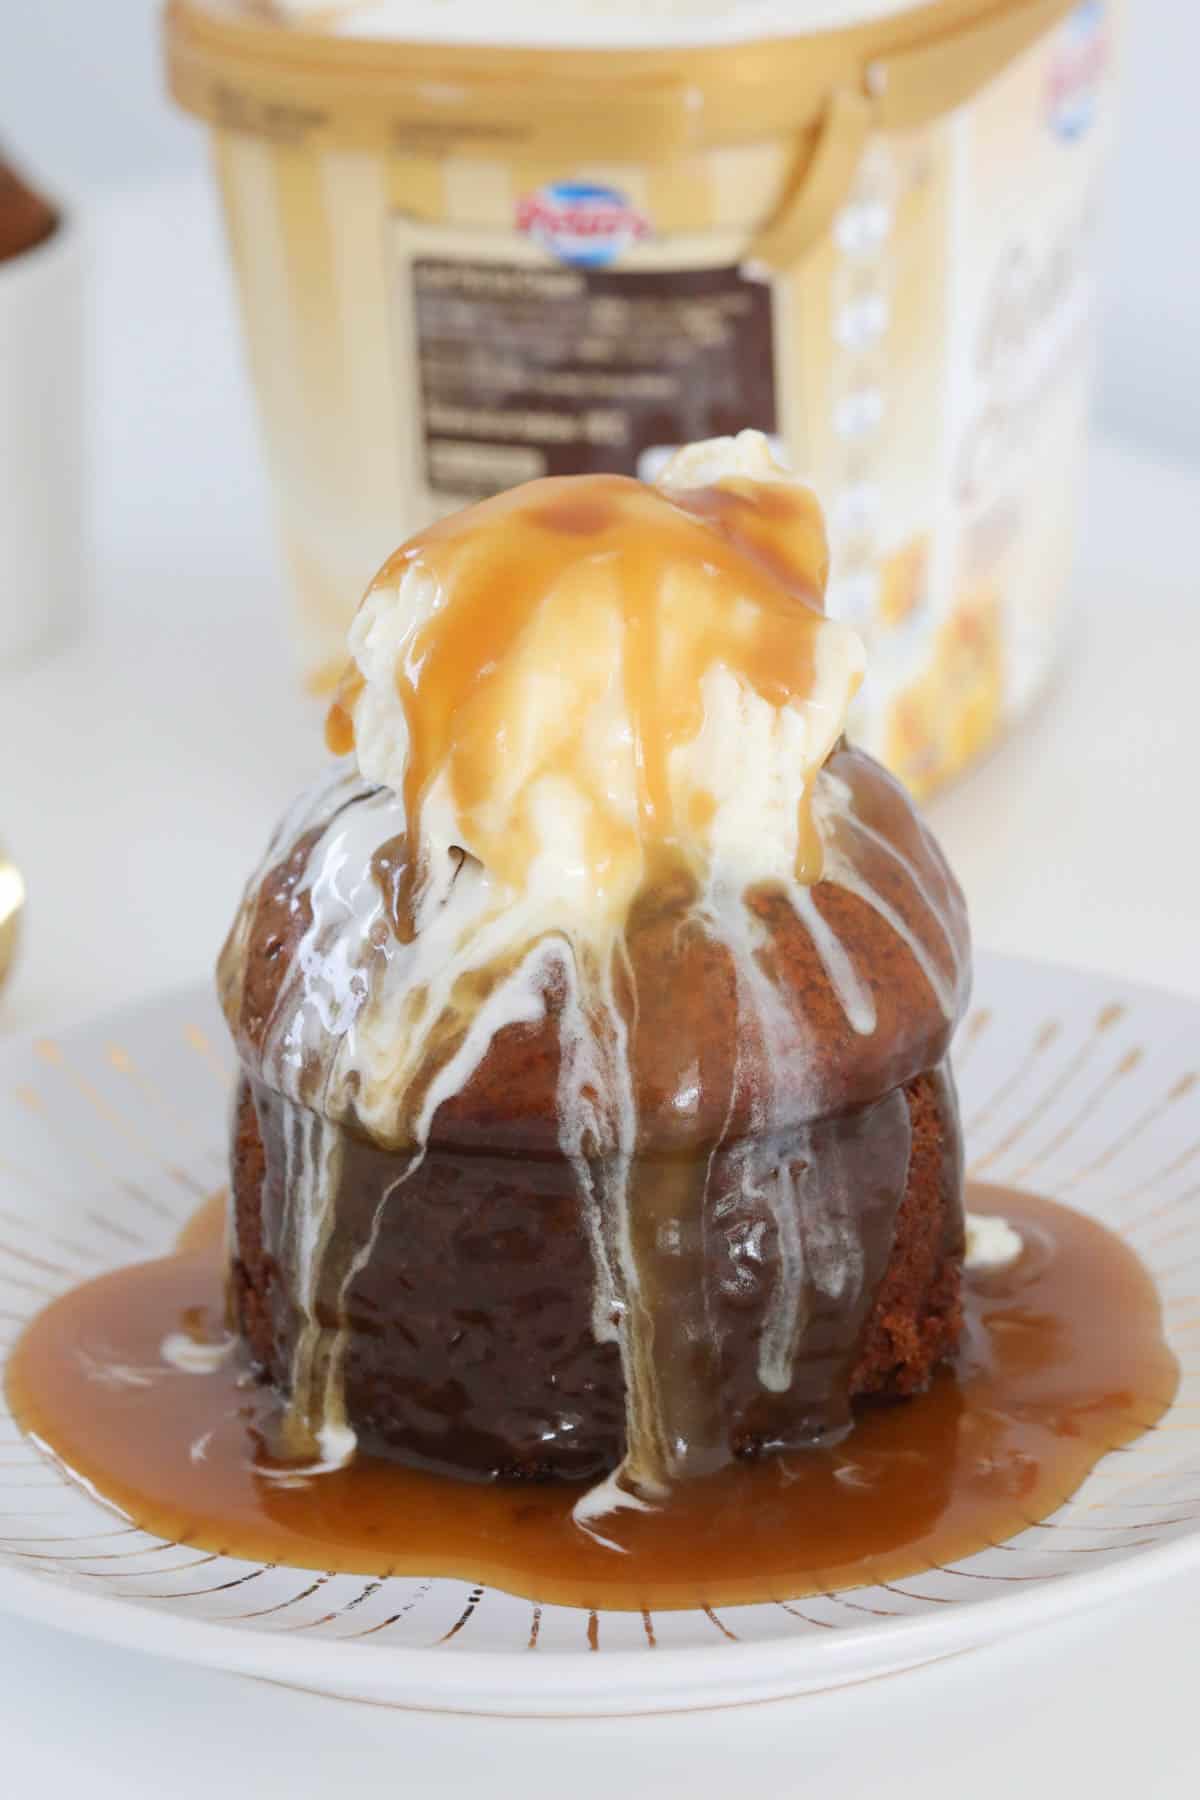 a sticky date pudding on a plate topped with ice cream and caramel sauce.